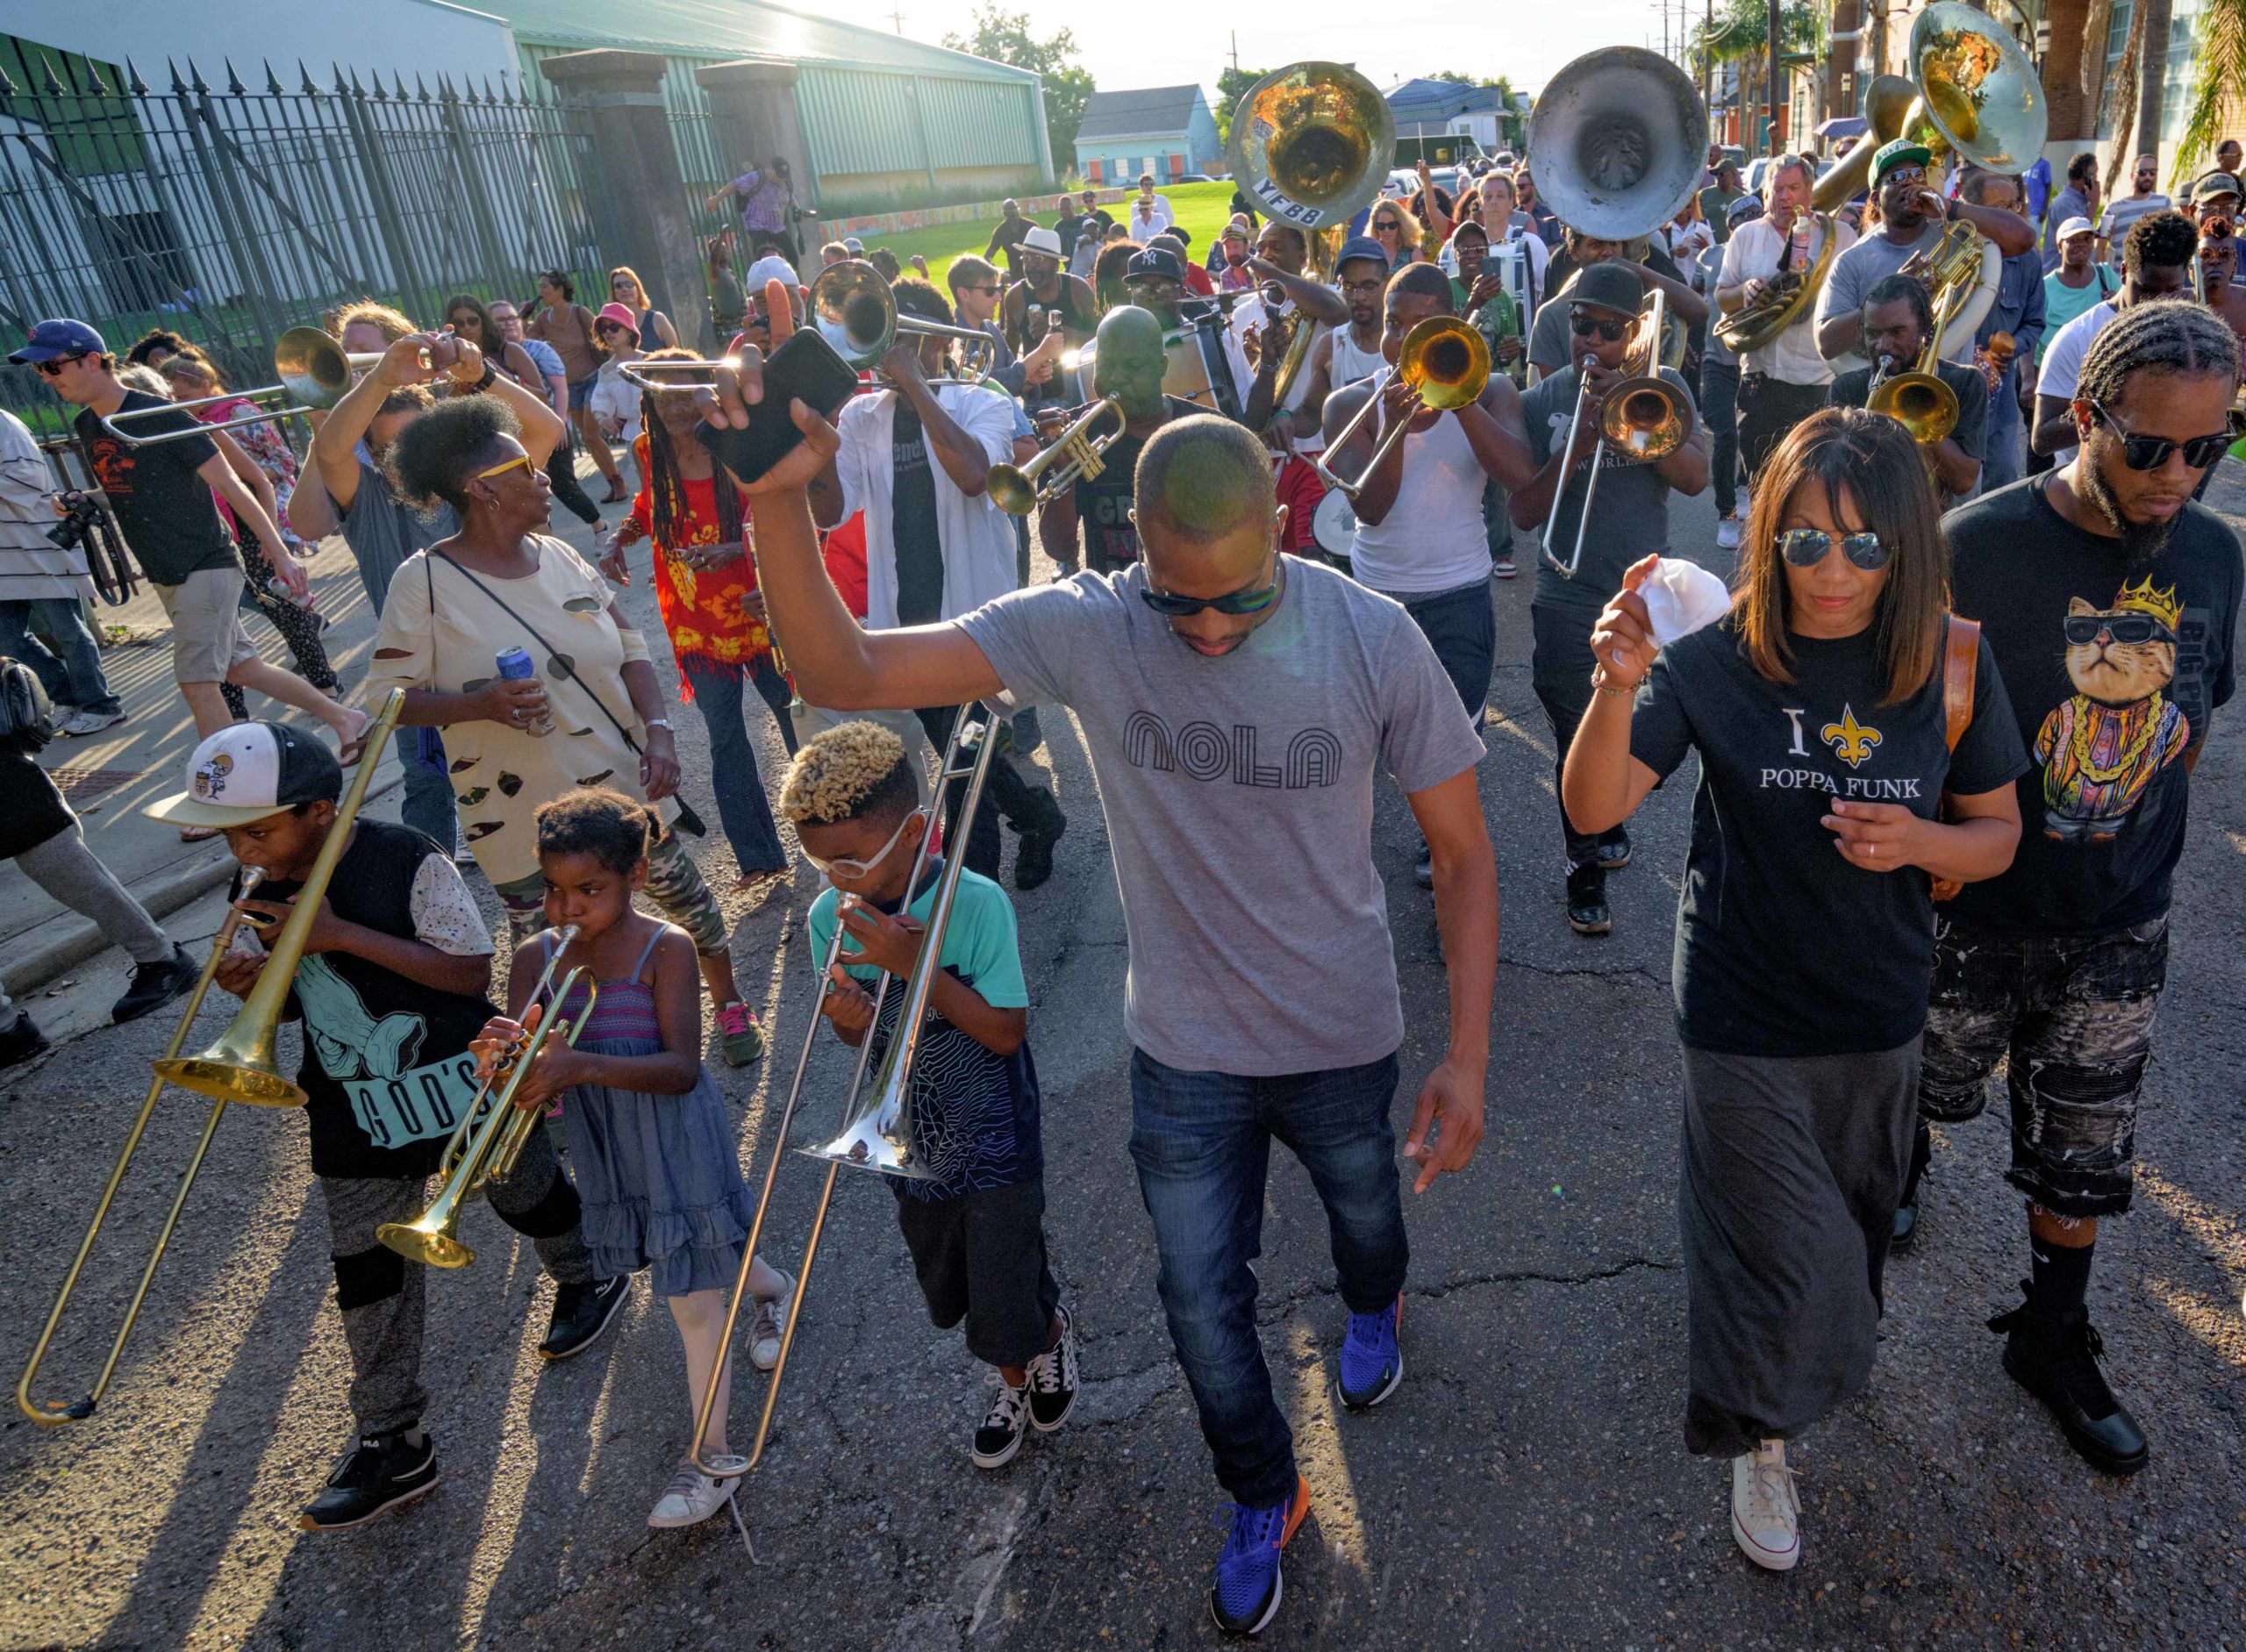 A brass band parades in memory of Art Poppa Funk Neville in the Treme neighborhood lead by Treme trombonist Corey Henry, top left, in New Orleans, Monday, July 29, 2019.  Arthur Lanon Neville (December 17, 1937  July 22, 2019) was known for New Orleans standards Hey Pocky A-Way, Fire on the Bayou, and Mardi Gras Mambo. He was a pioneer of funk and New Orleans music, and was best known as the keyboardist and songwriter for the Grammy-winning Neville Brothers and Rock and Roll Hall of Fame nominated The Meters. Photo by Matthew Hinton